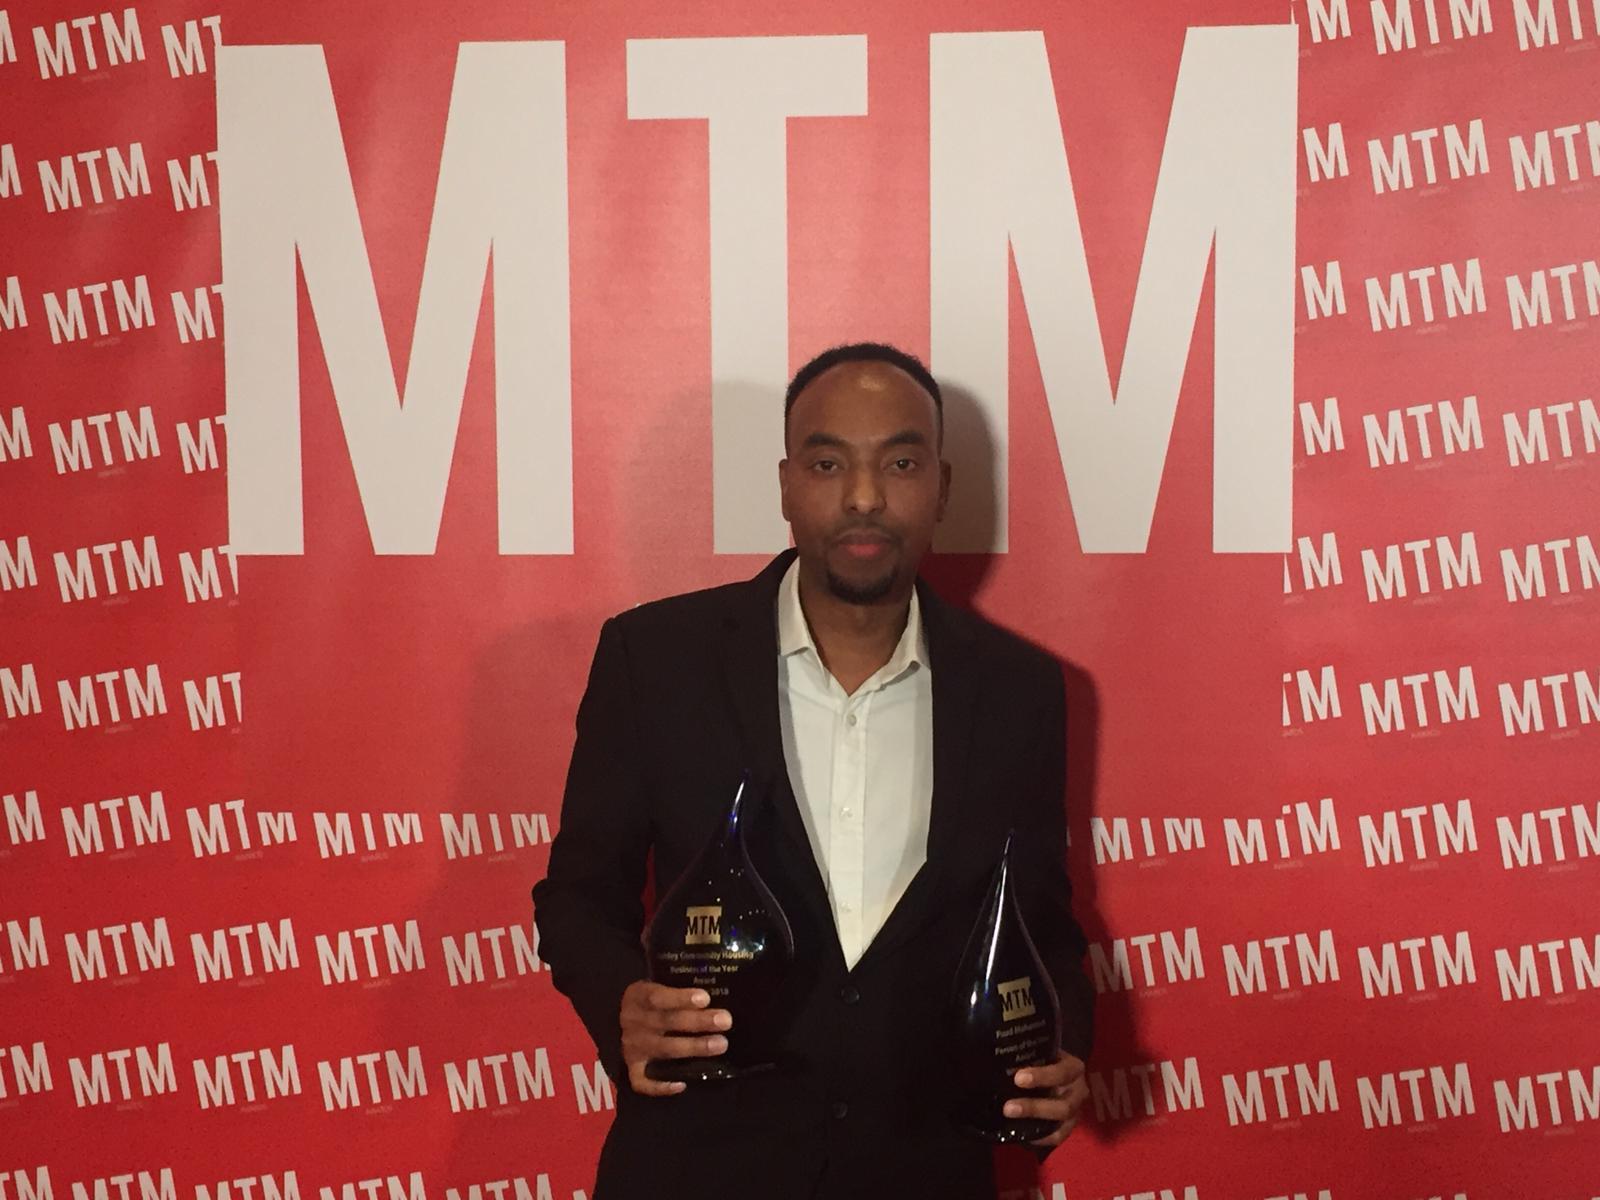 Fuad Mahamed wins Person of the Year at the MTM Awards 2018